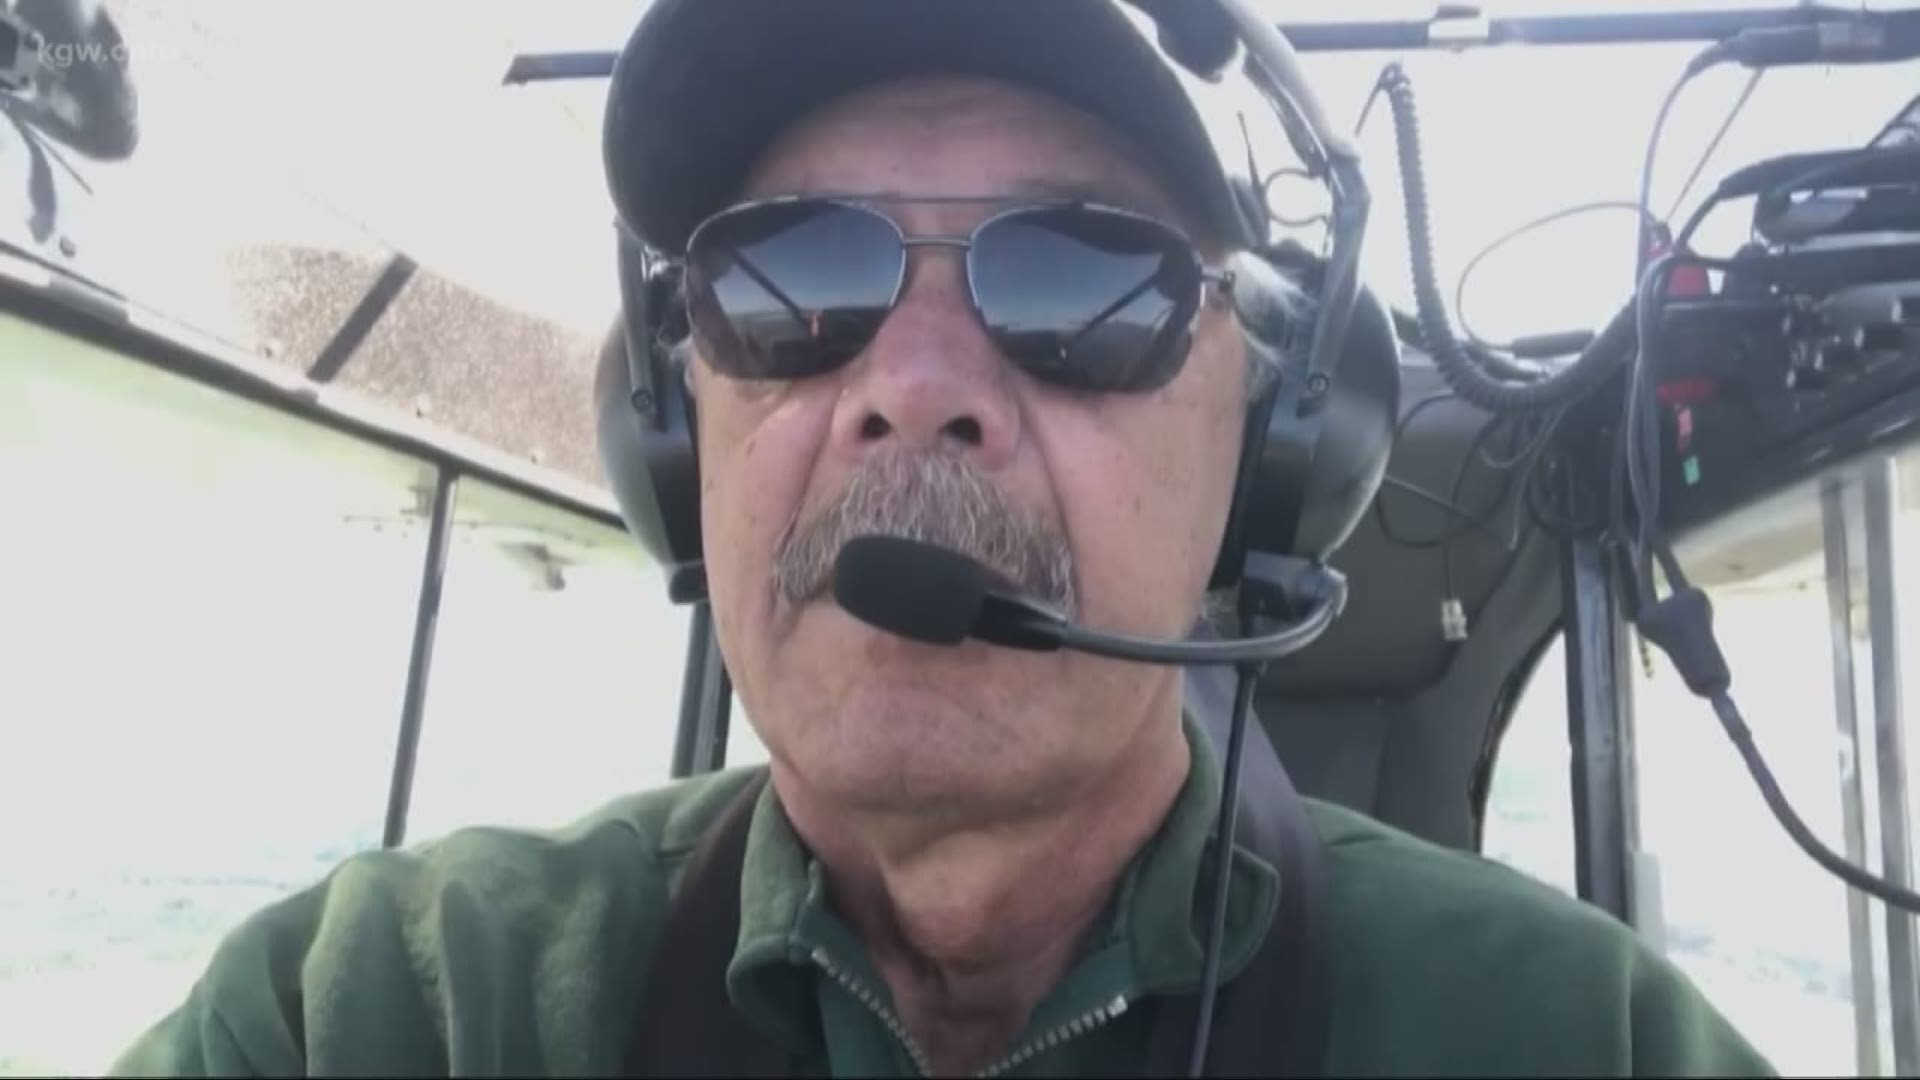 Those Who Serve: Retired Sheriff Joe Wampler finds those who are lost in the wilderness.
Over the past four decades, the retired Hood River sheriff has flown thousands of rescue missions to find lost hikers and climbers.